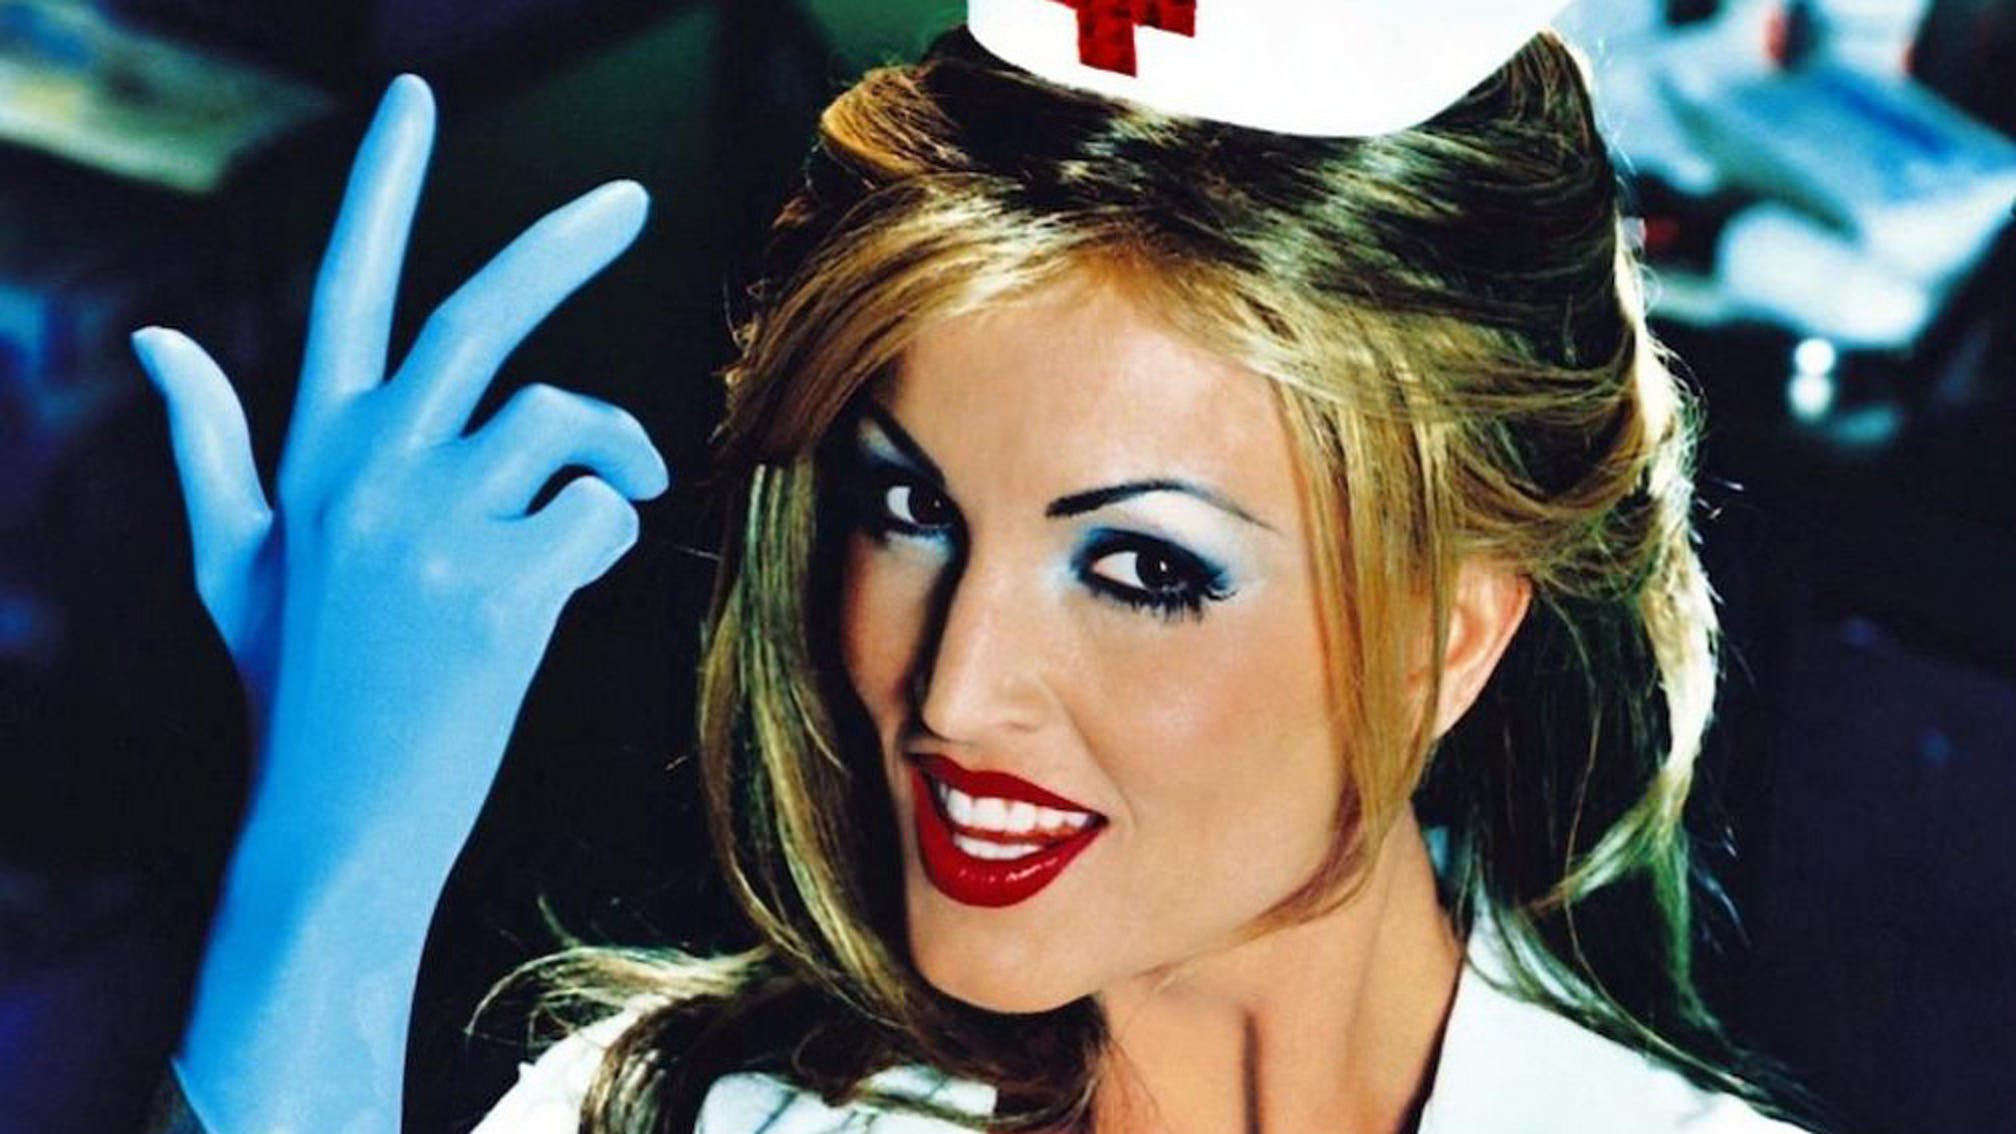 Schoolgirl Enema Porn - Blink-182: Our 1999 'Enema of the State' Interview